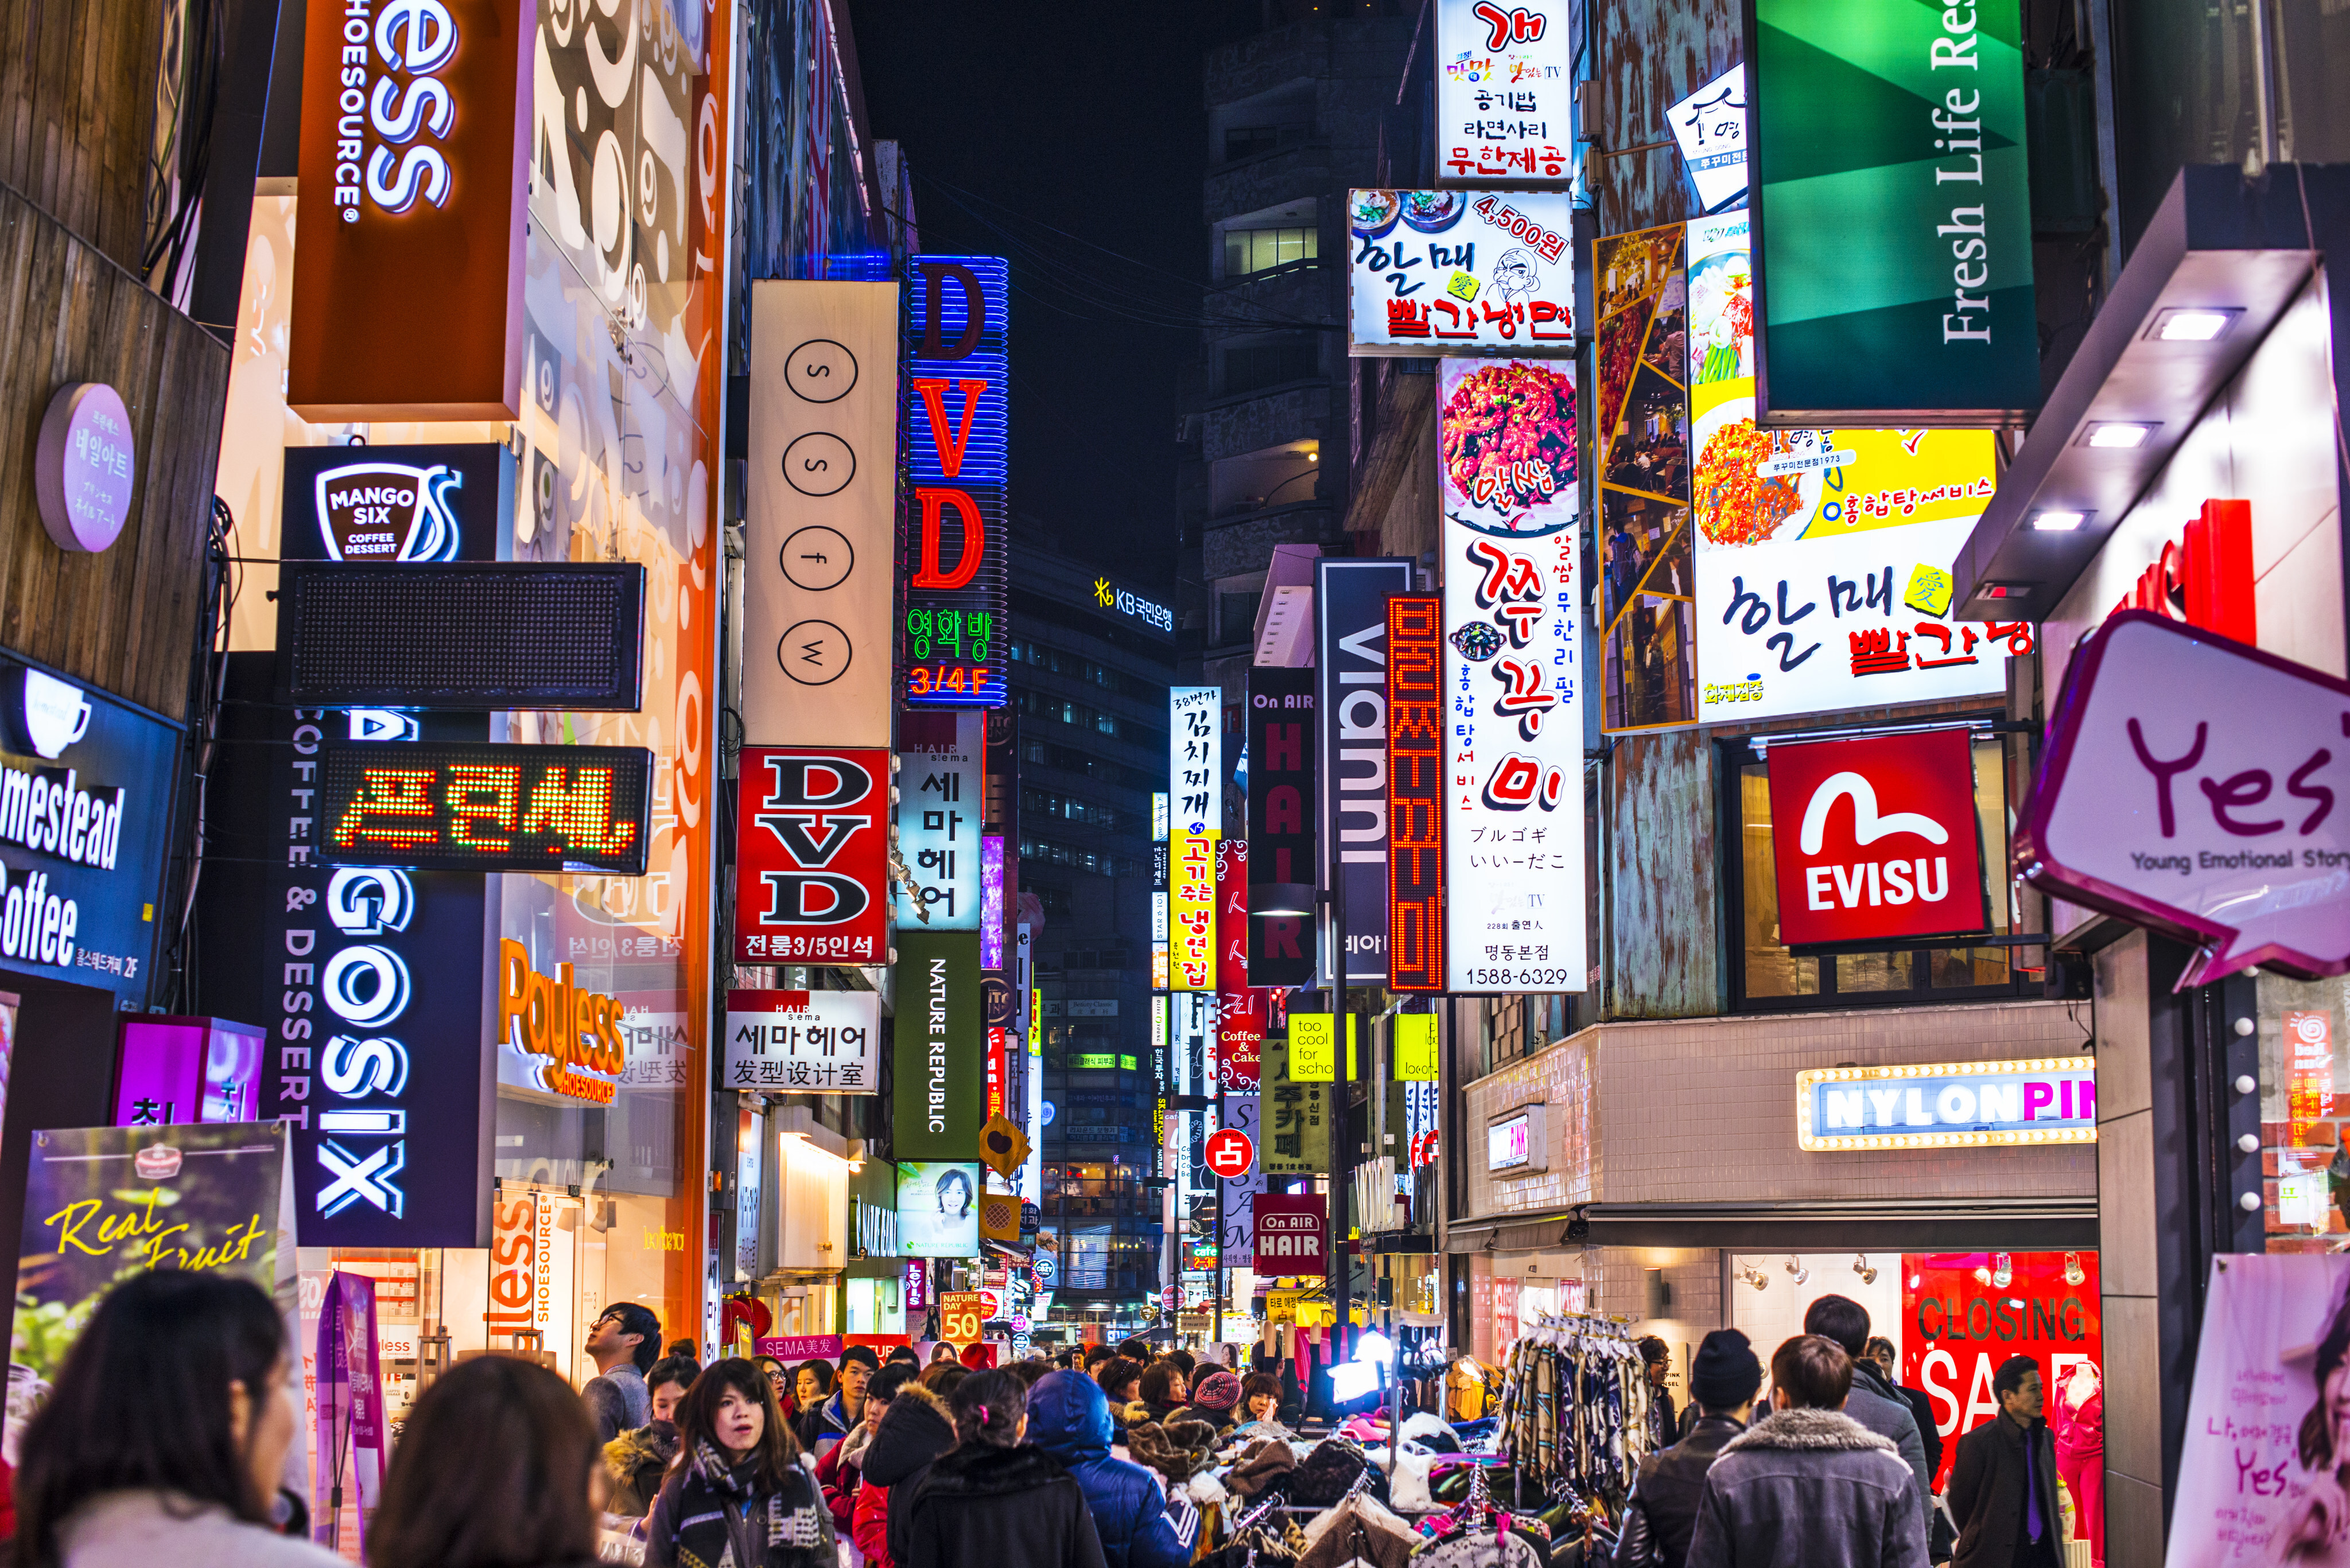 Crowds at the Myeongdong shopping district in Seoul. Photo: Shutterstock